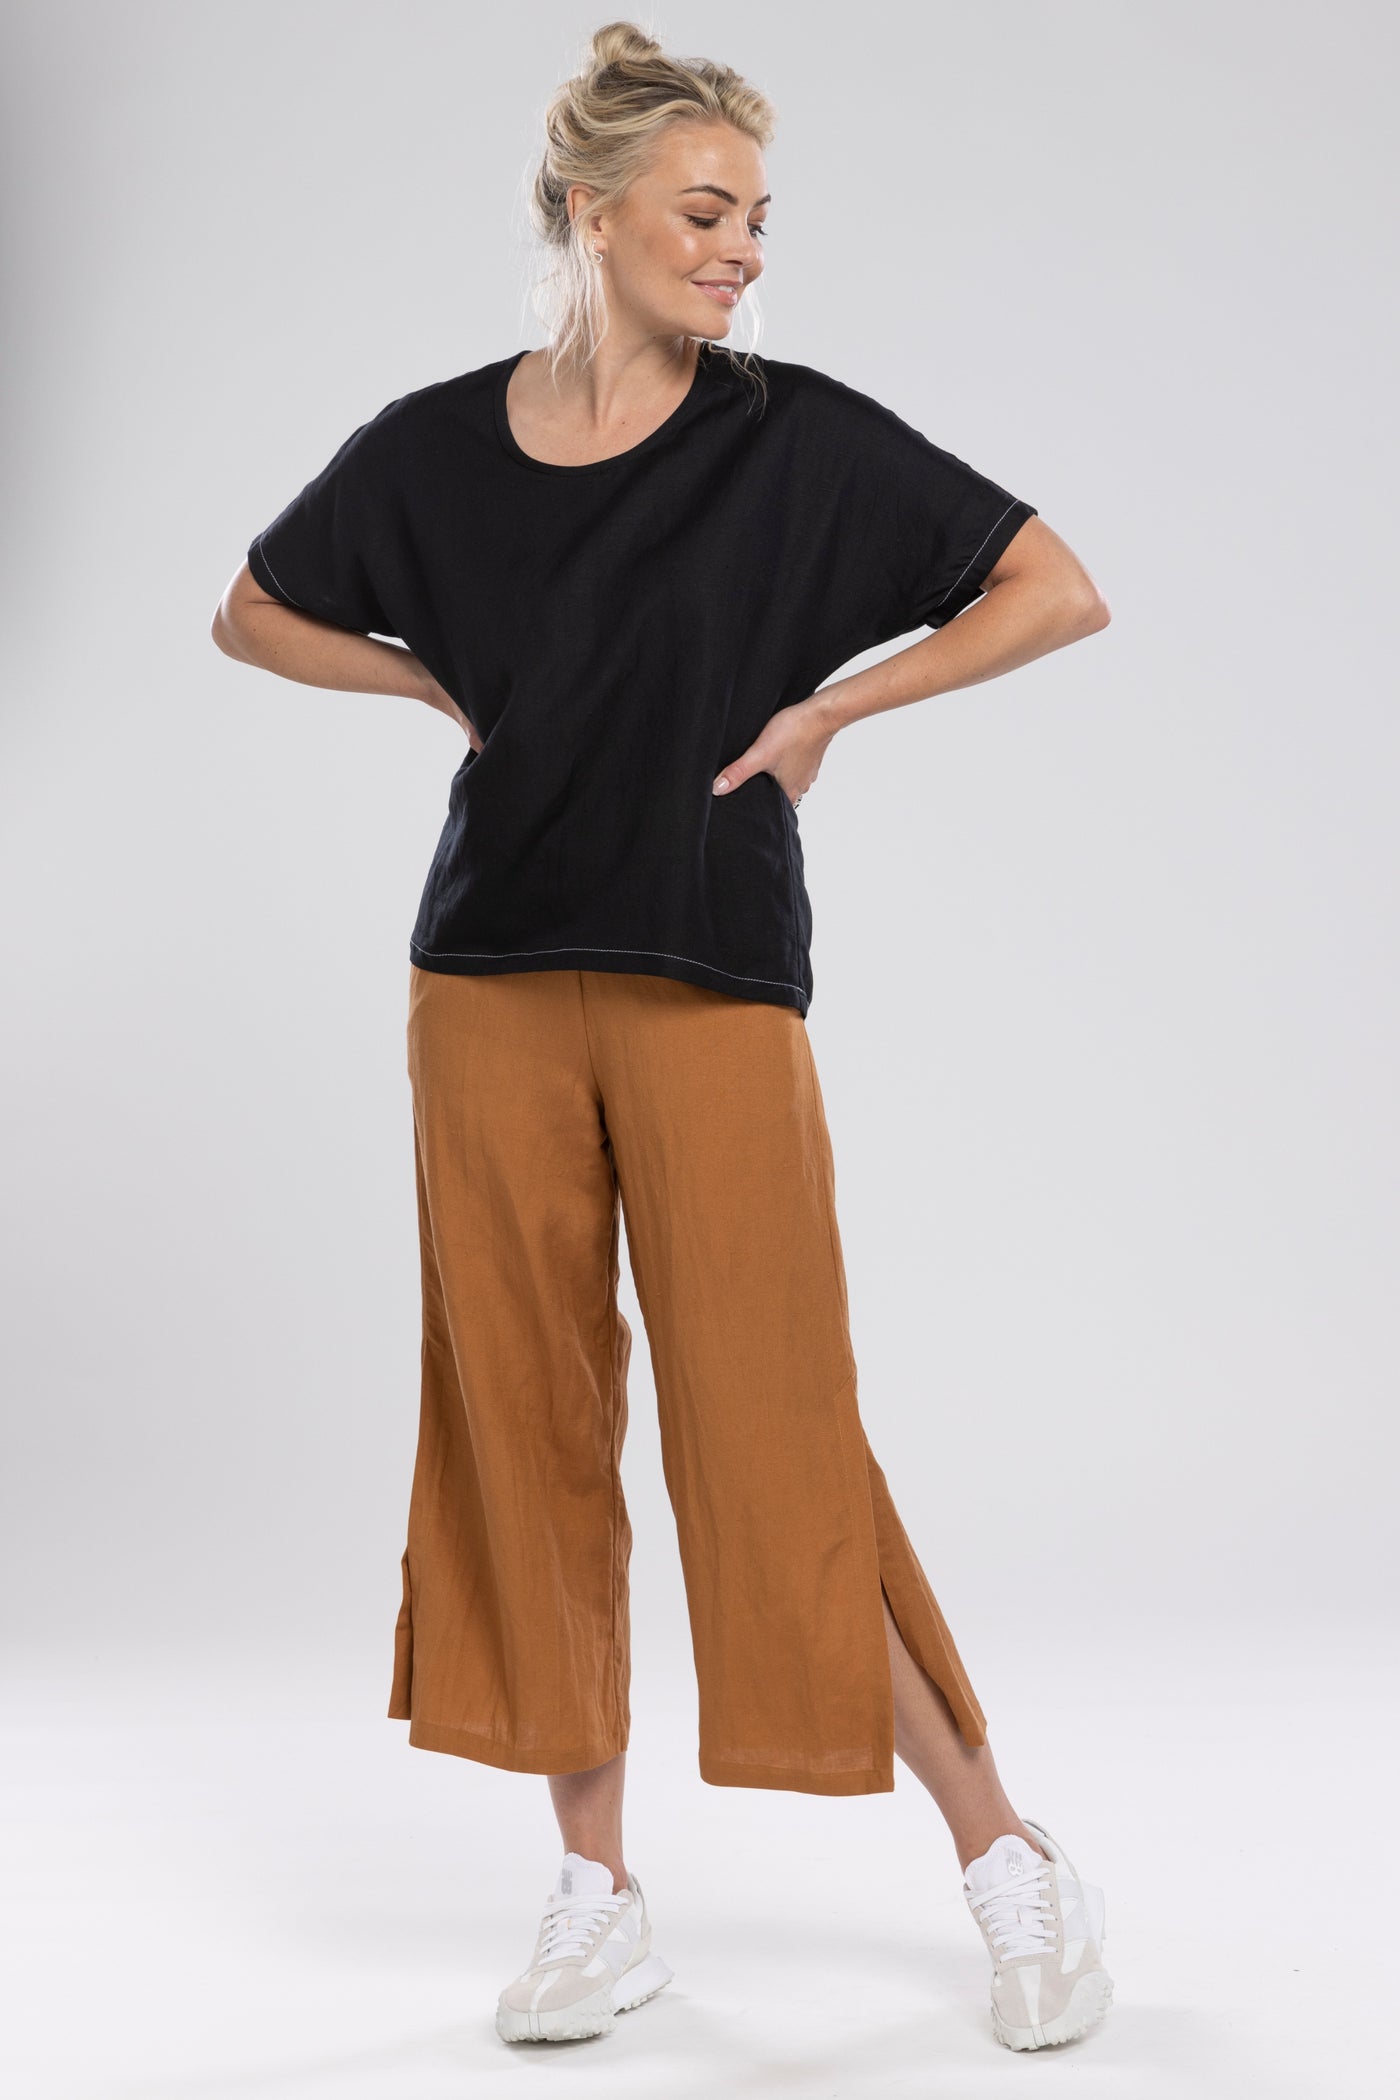 Ultimate in comfort & style!  The division Linen pant a NES Fav and a go to transeasonal pant. perfect for travelling and great to dress up or down. 